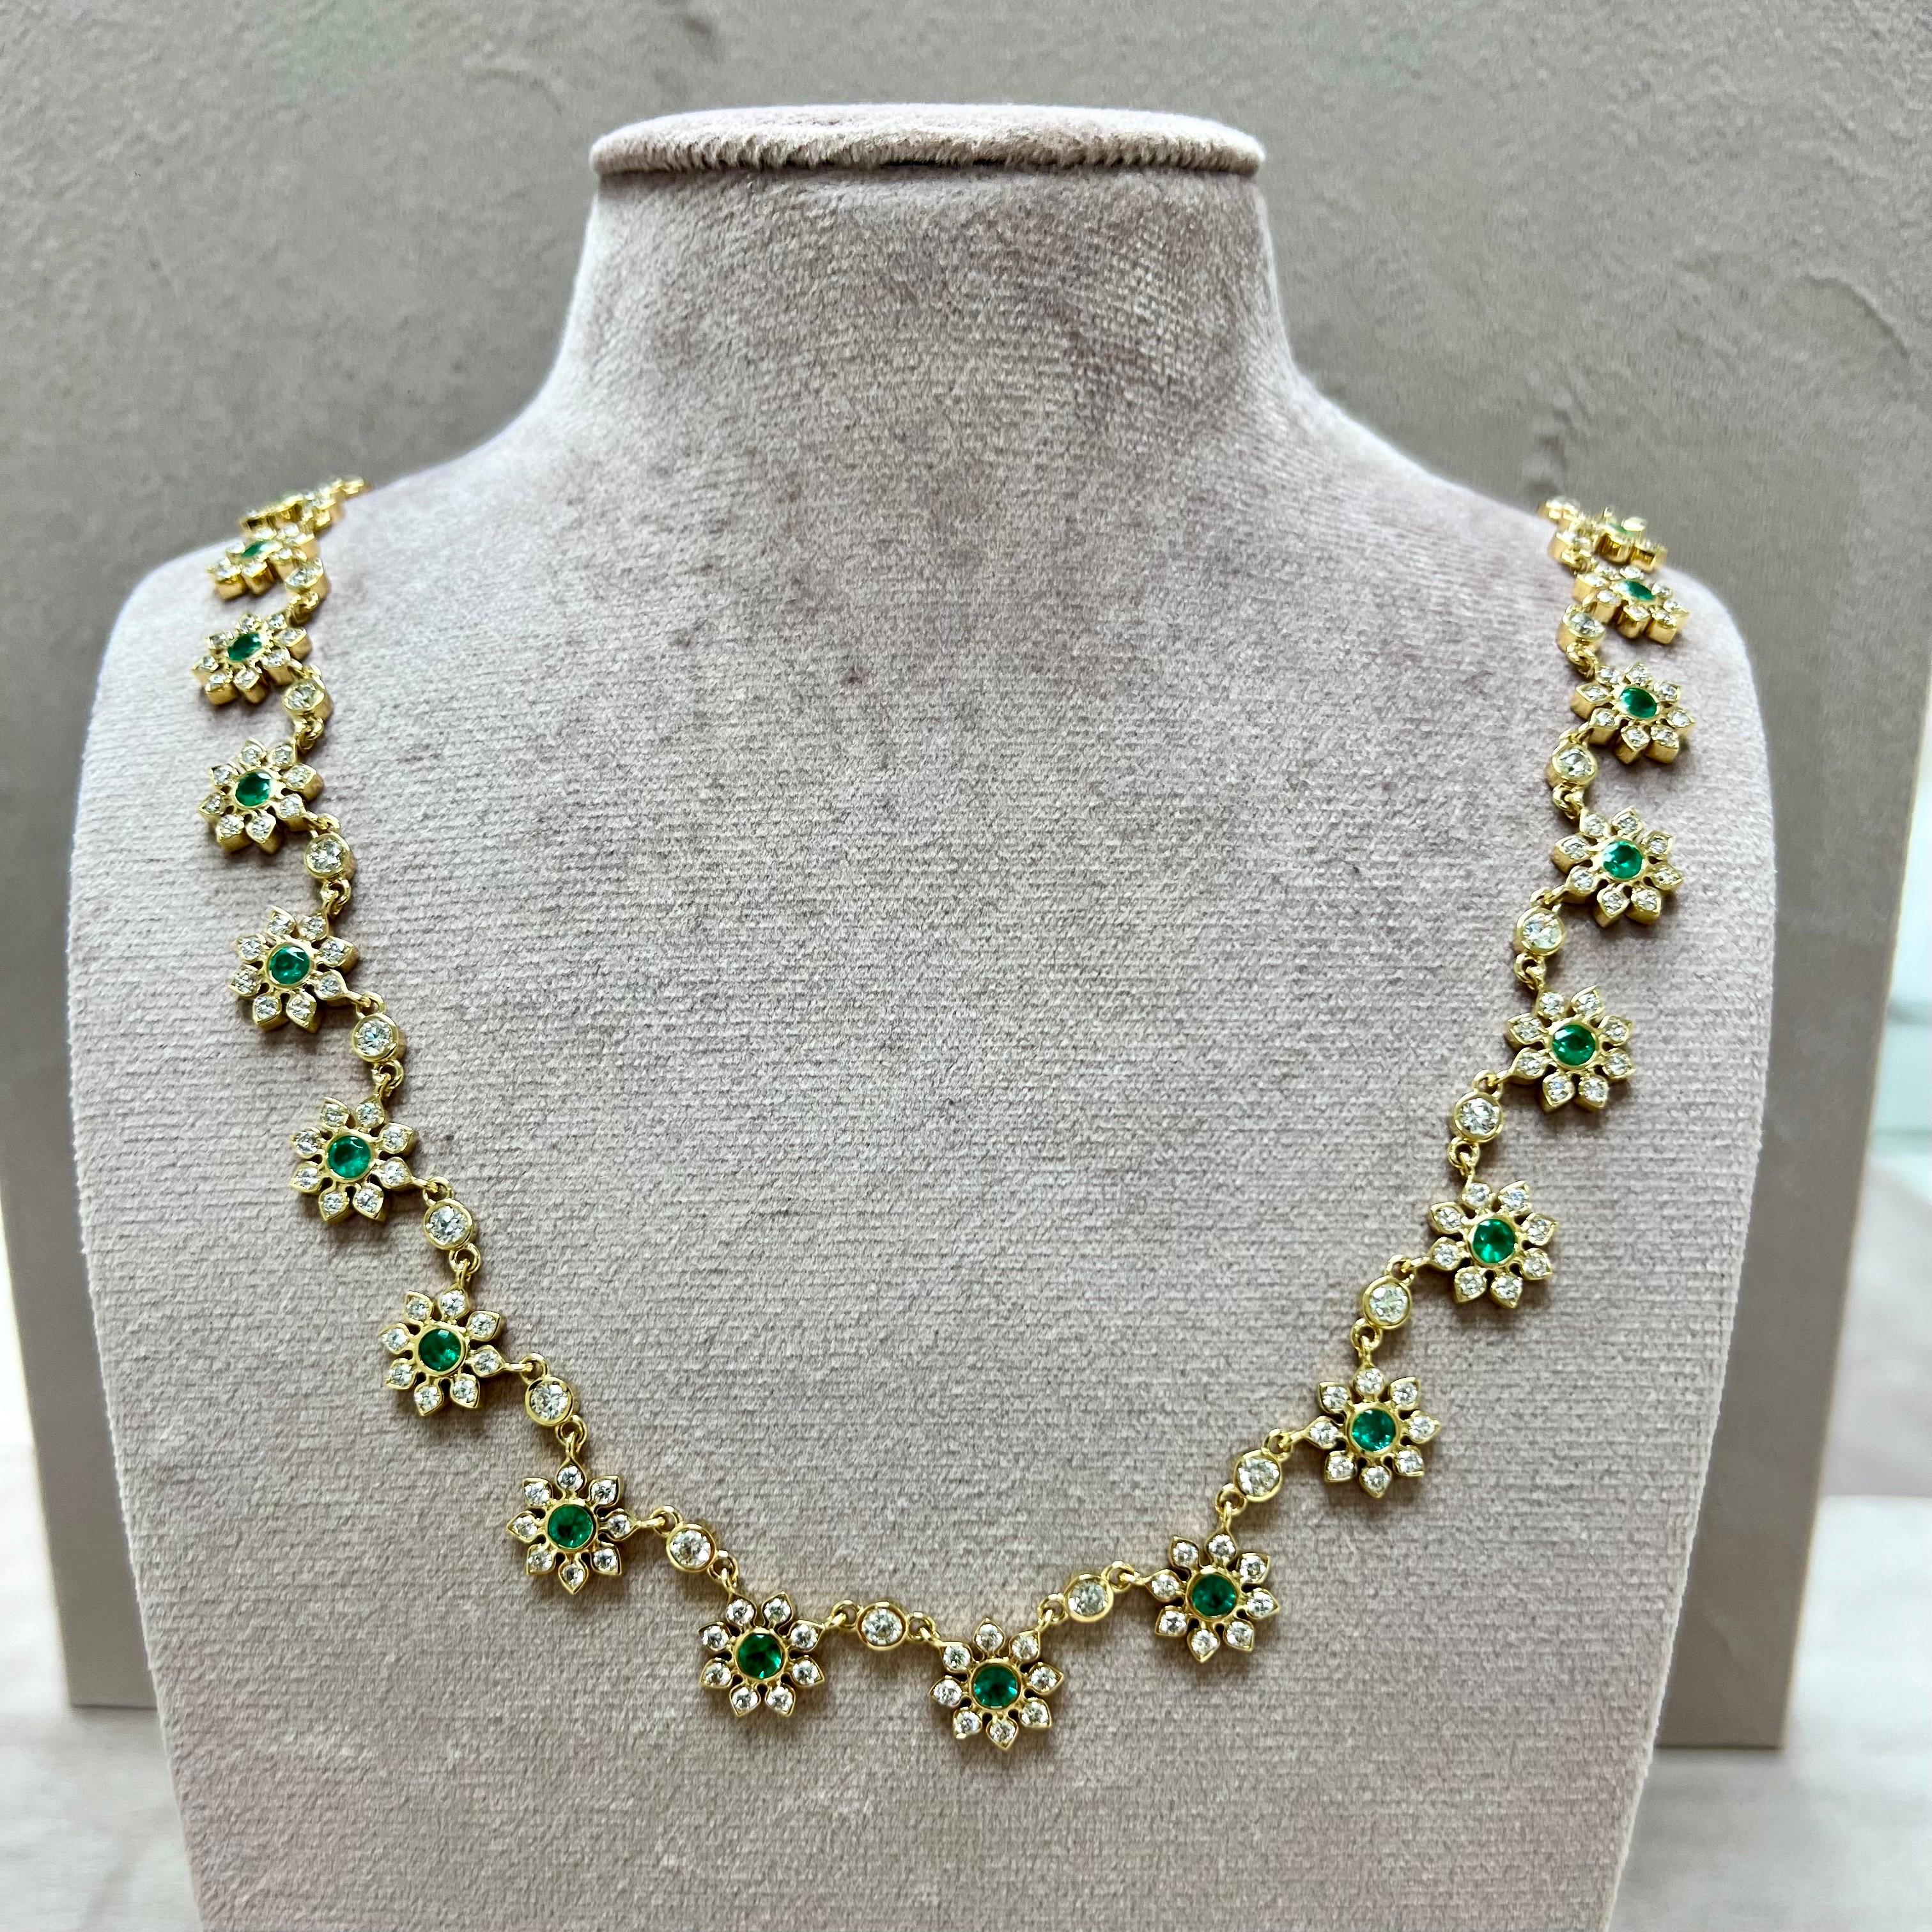 Created in 18 karat yellow gold
Emeralds 3.30 carats approx.
Diamonds 8.40 carats approx.
18 inch length
18 karat yellow gold lobster clasp
Chain can be clasped at any length



About the Designers ~ Dharmesh & Namrata

Drawing inspiration from